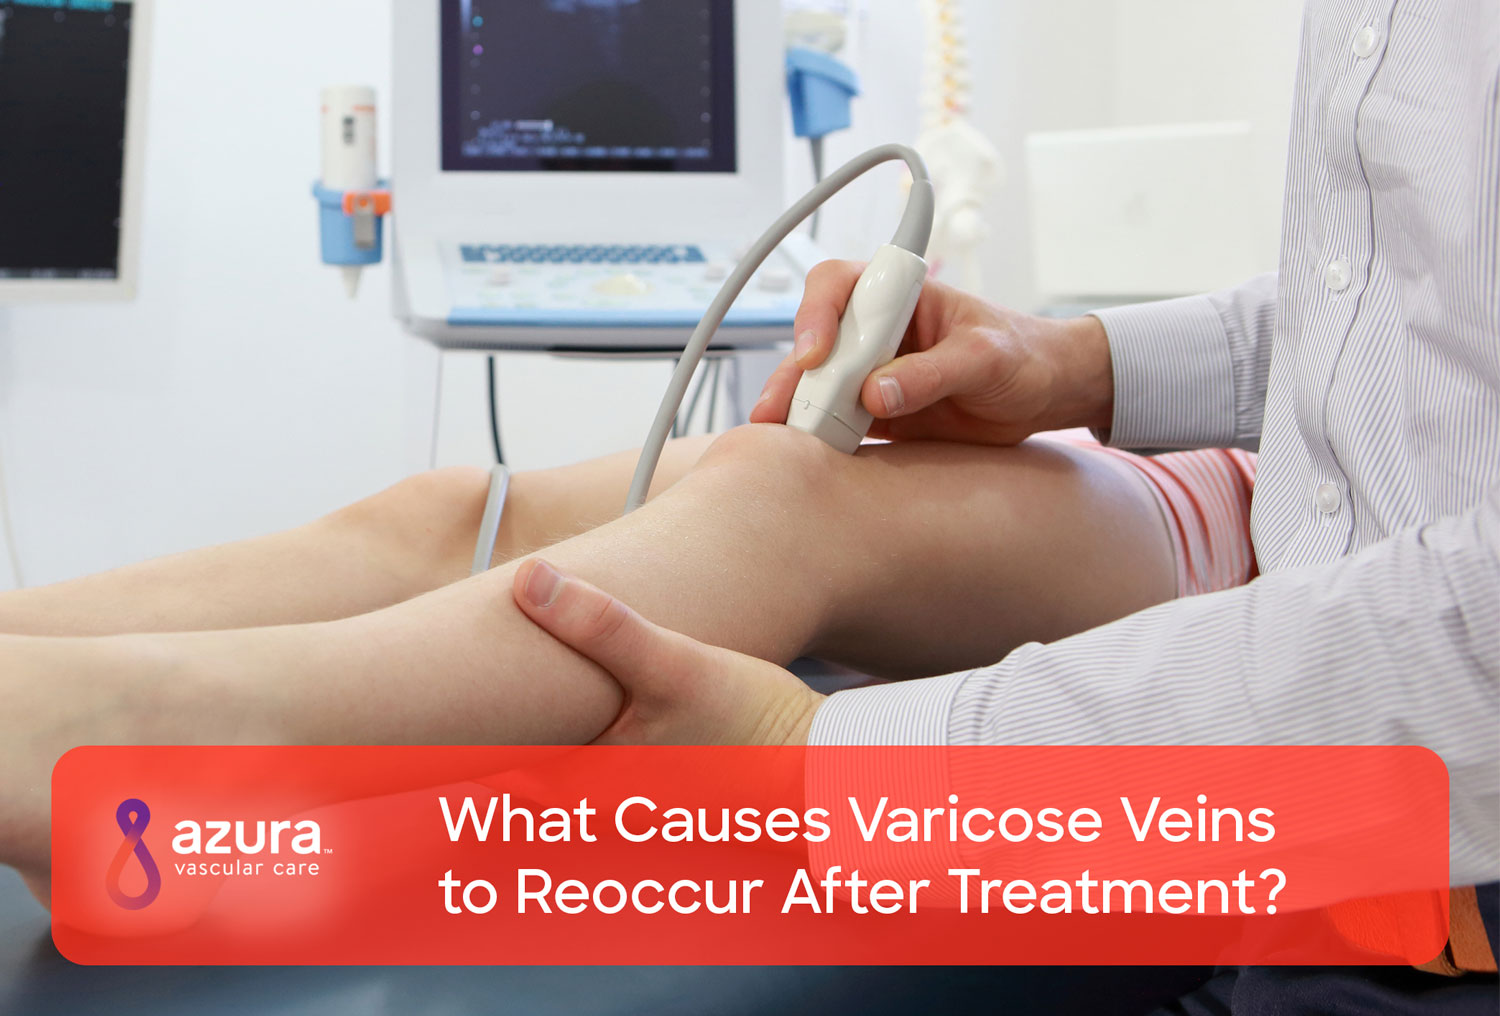 https://www.azuravascularcare.com//assets/What-Causes-Varicose-Veins-to-Reoccur-After-Treatment.jpg